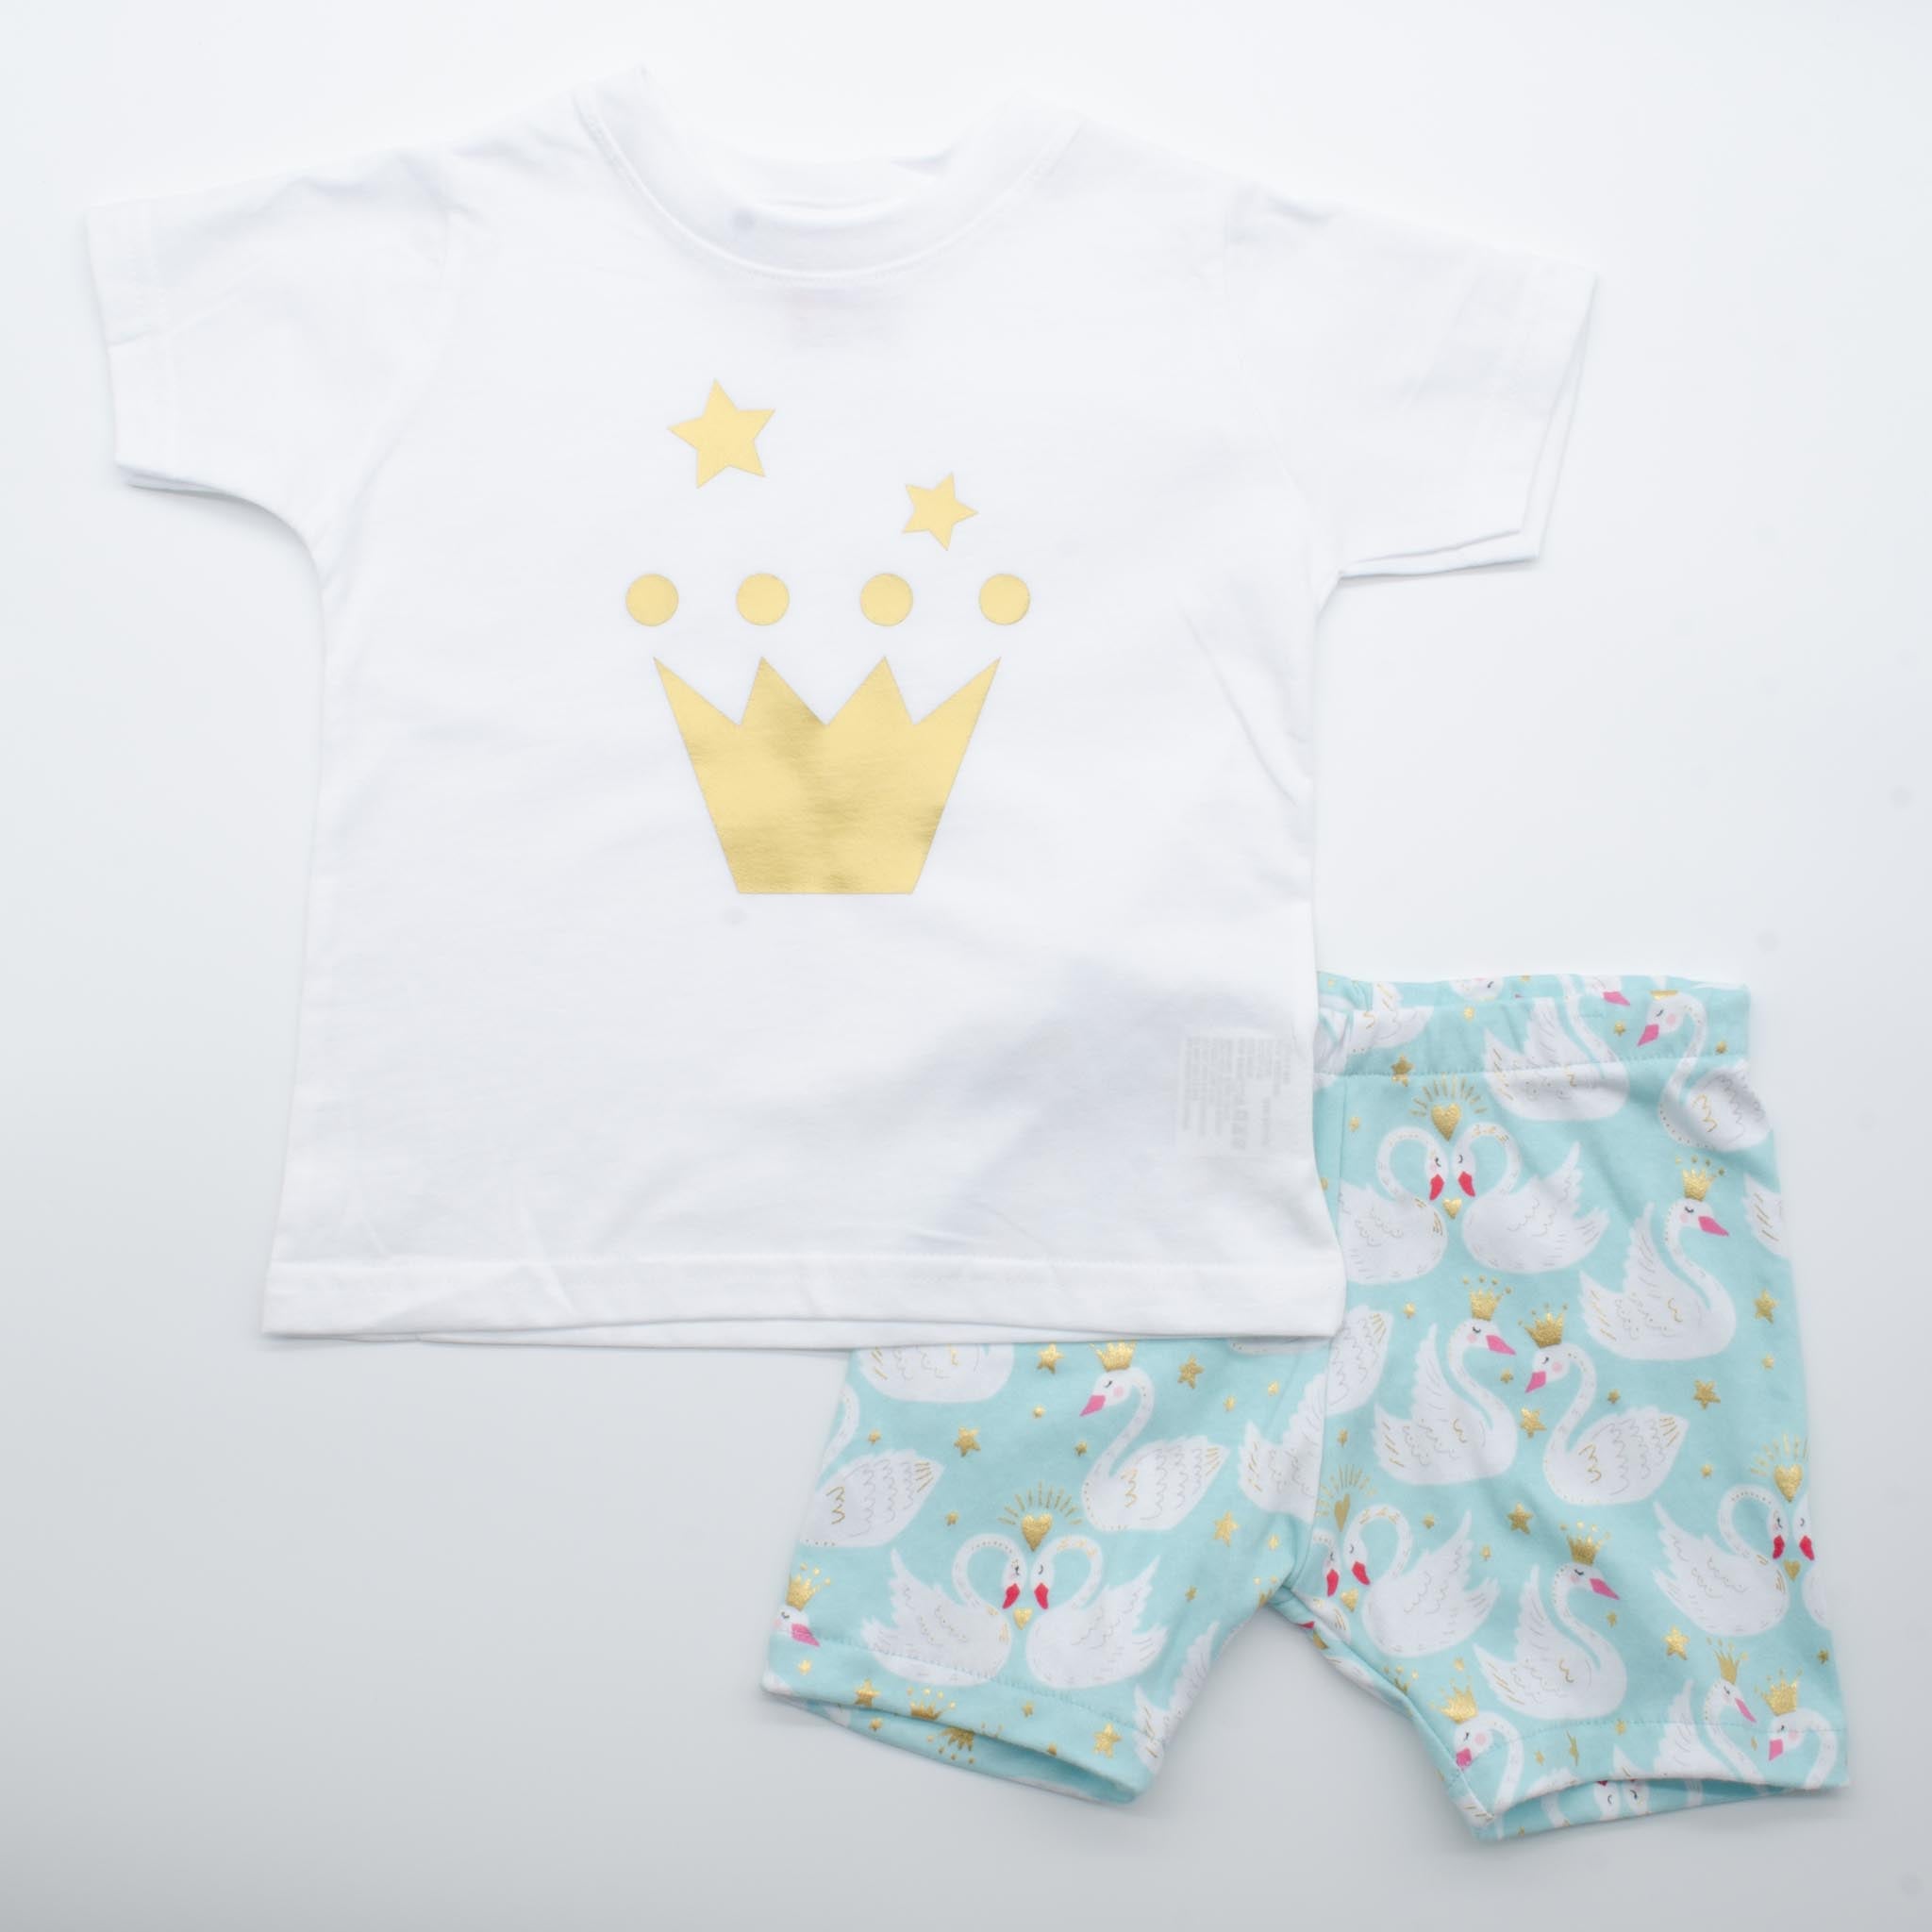 Swan Magic Outifit for Baby